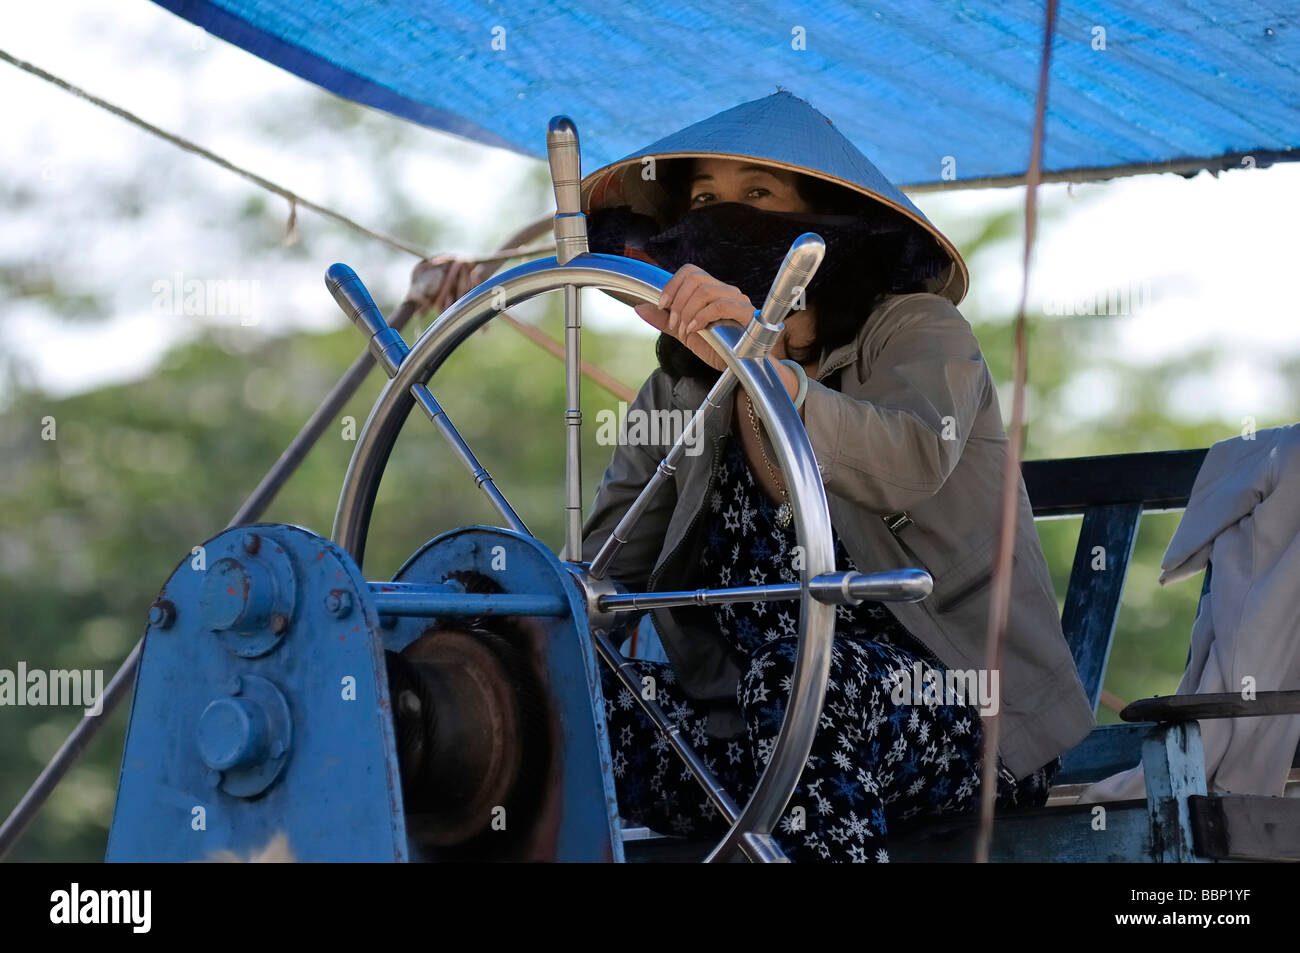 Woman with a traditional hat, cone-shaped hat made of palm leaves, steering a steering wheel at the Mekong, Can Tho, Mekong Del Stock Photo